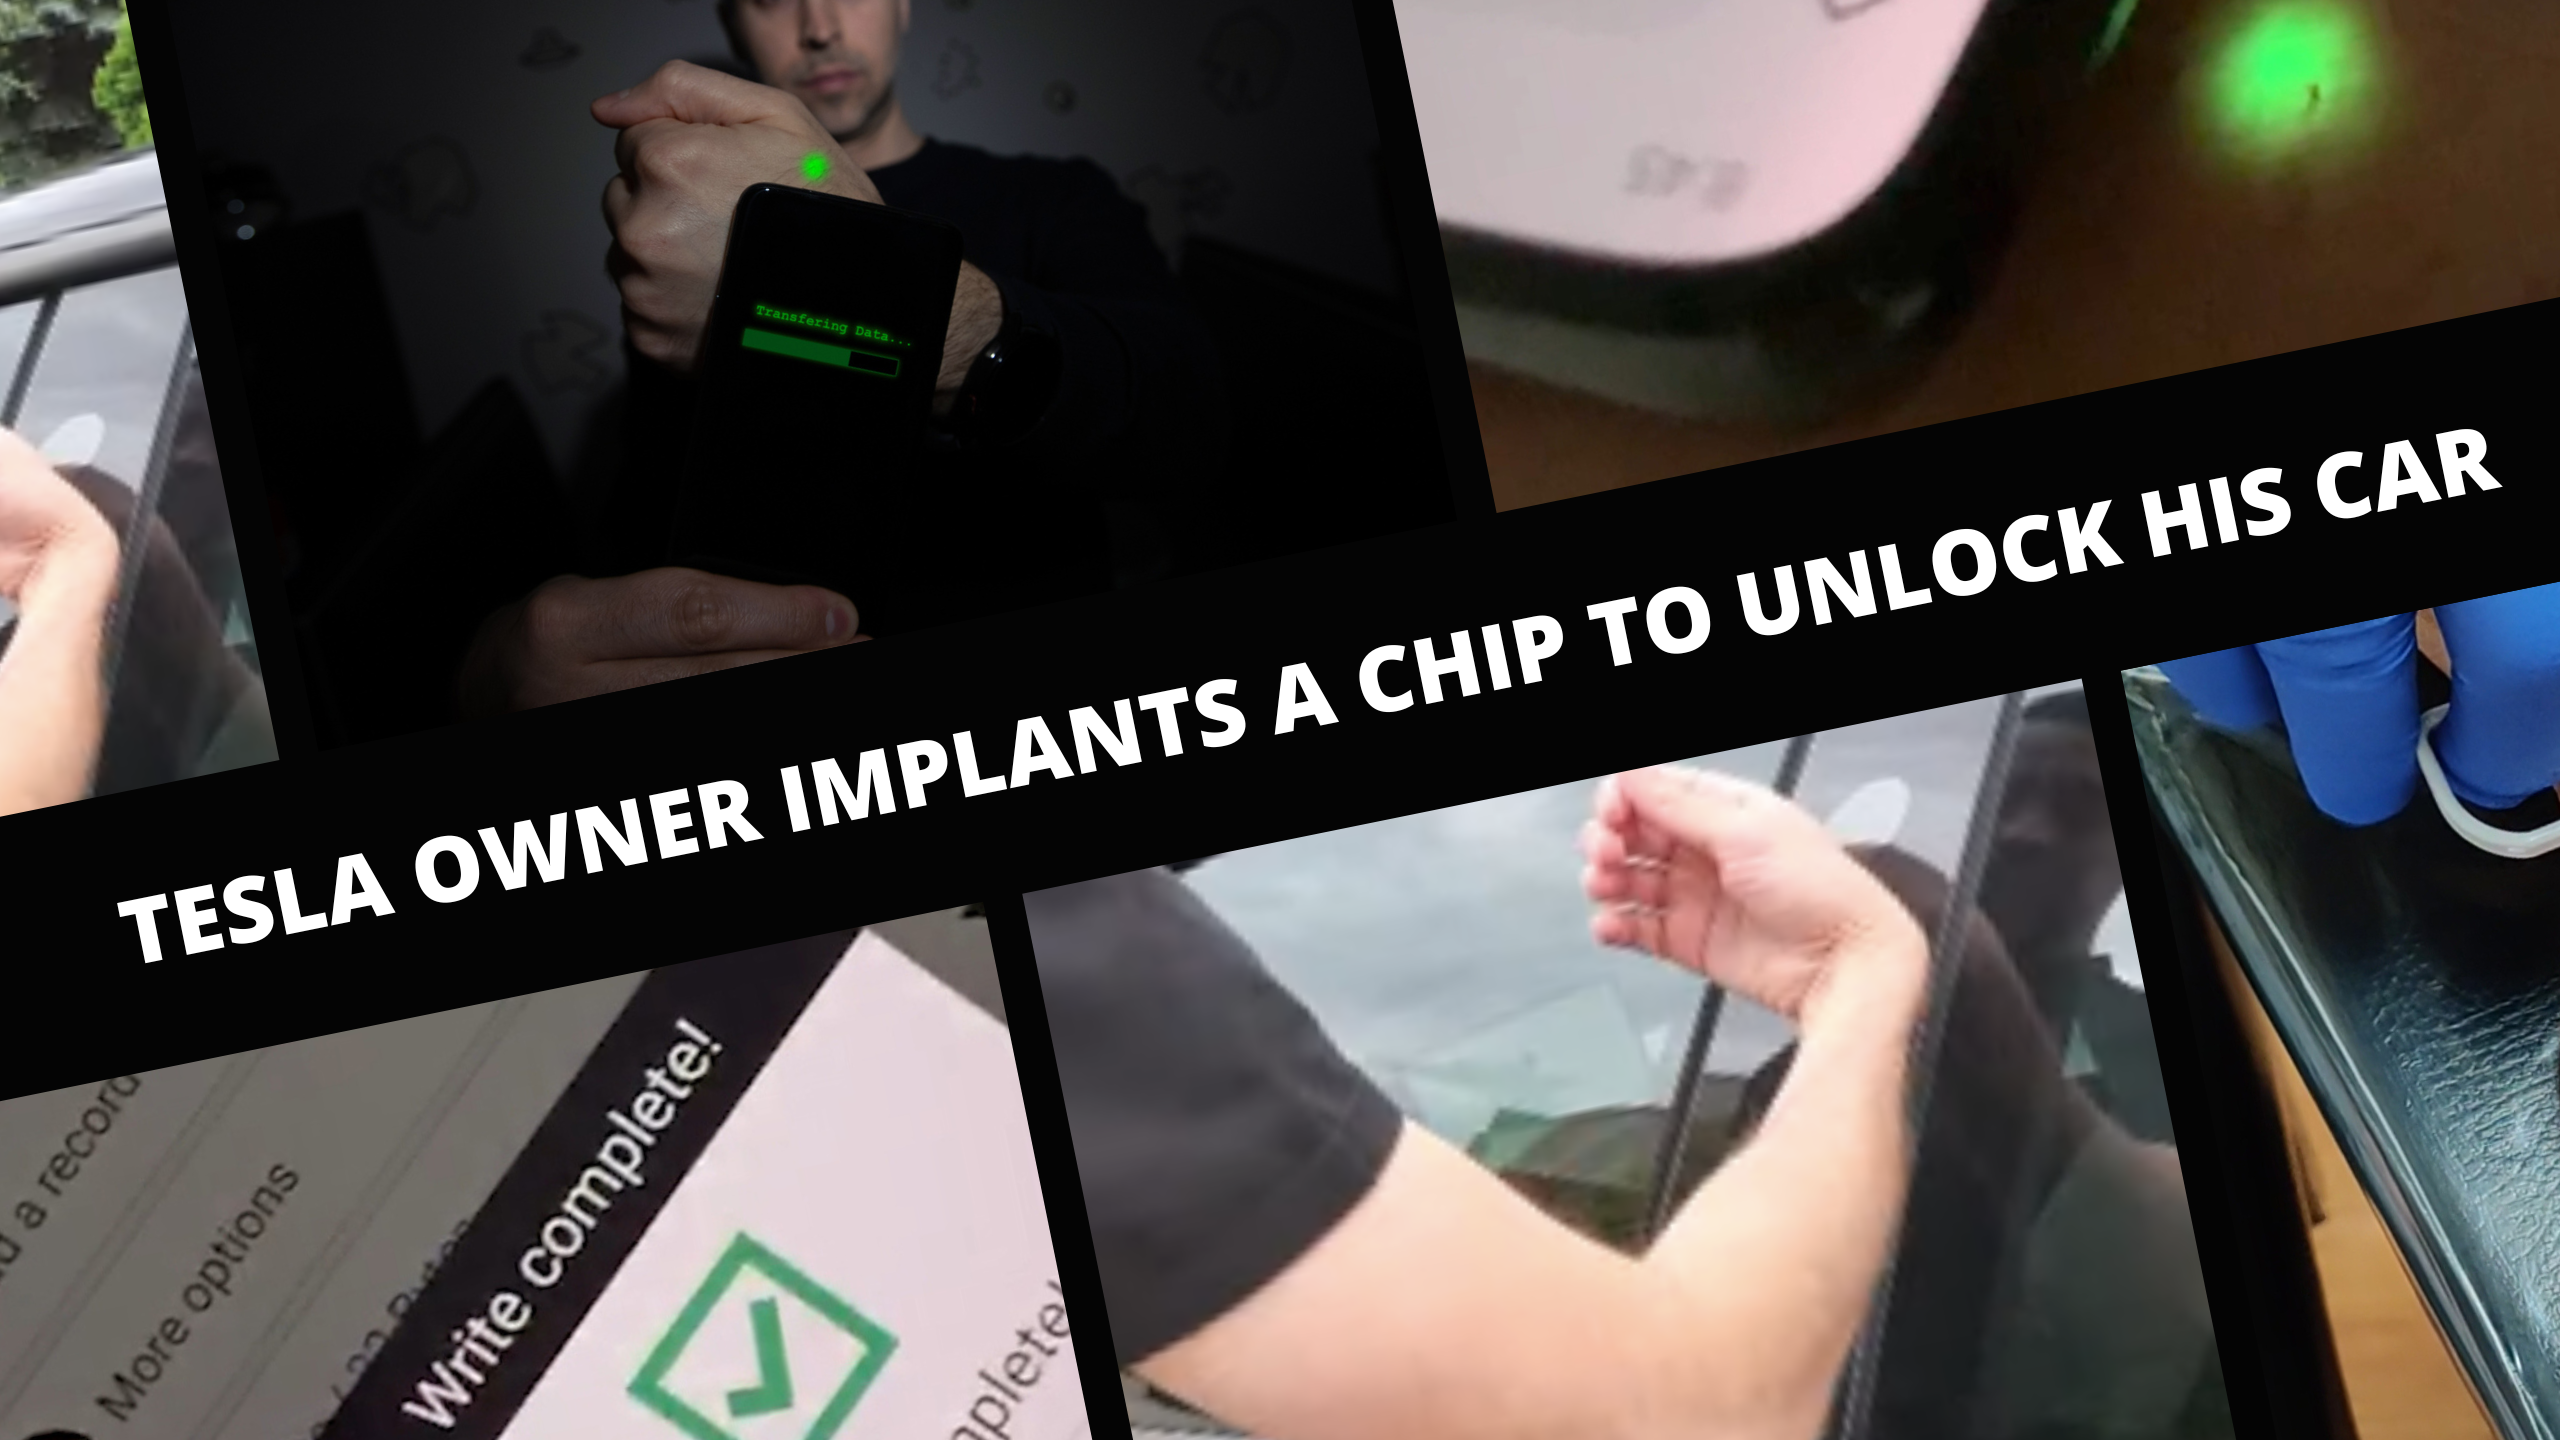 Tesla owner implants a chip to unlock his car and more1